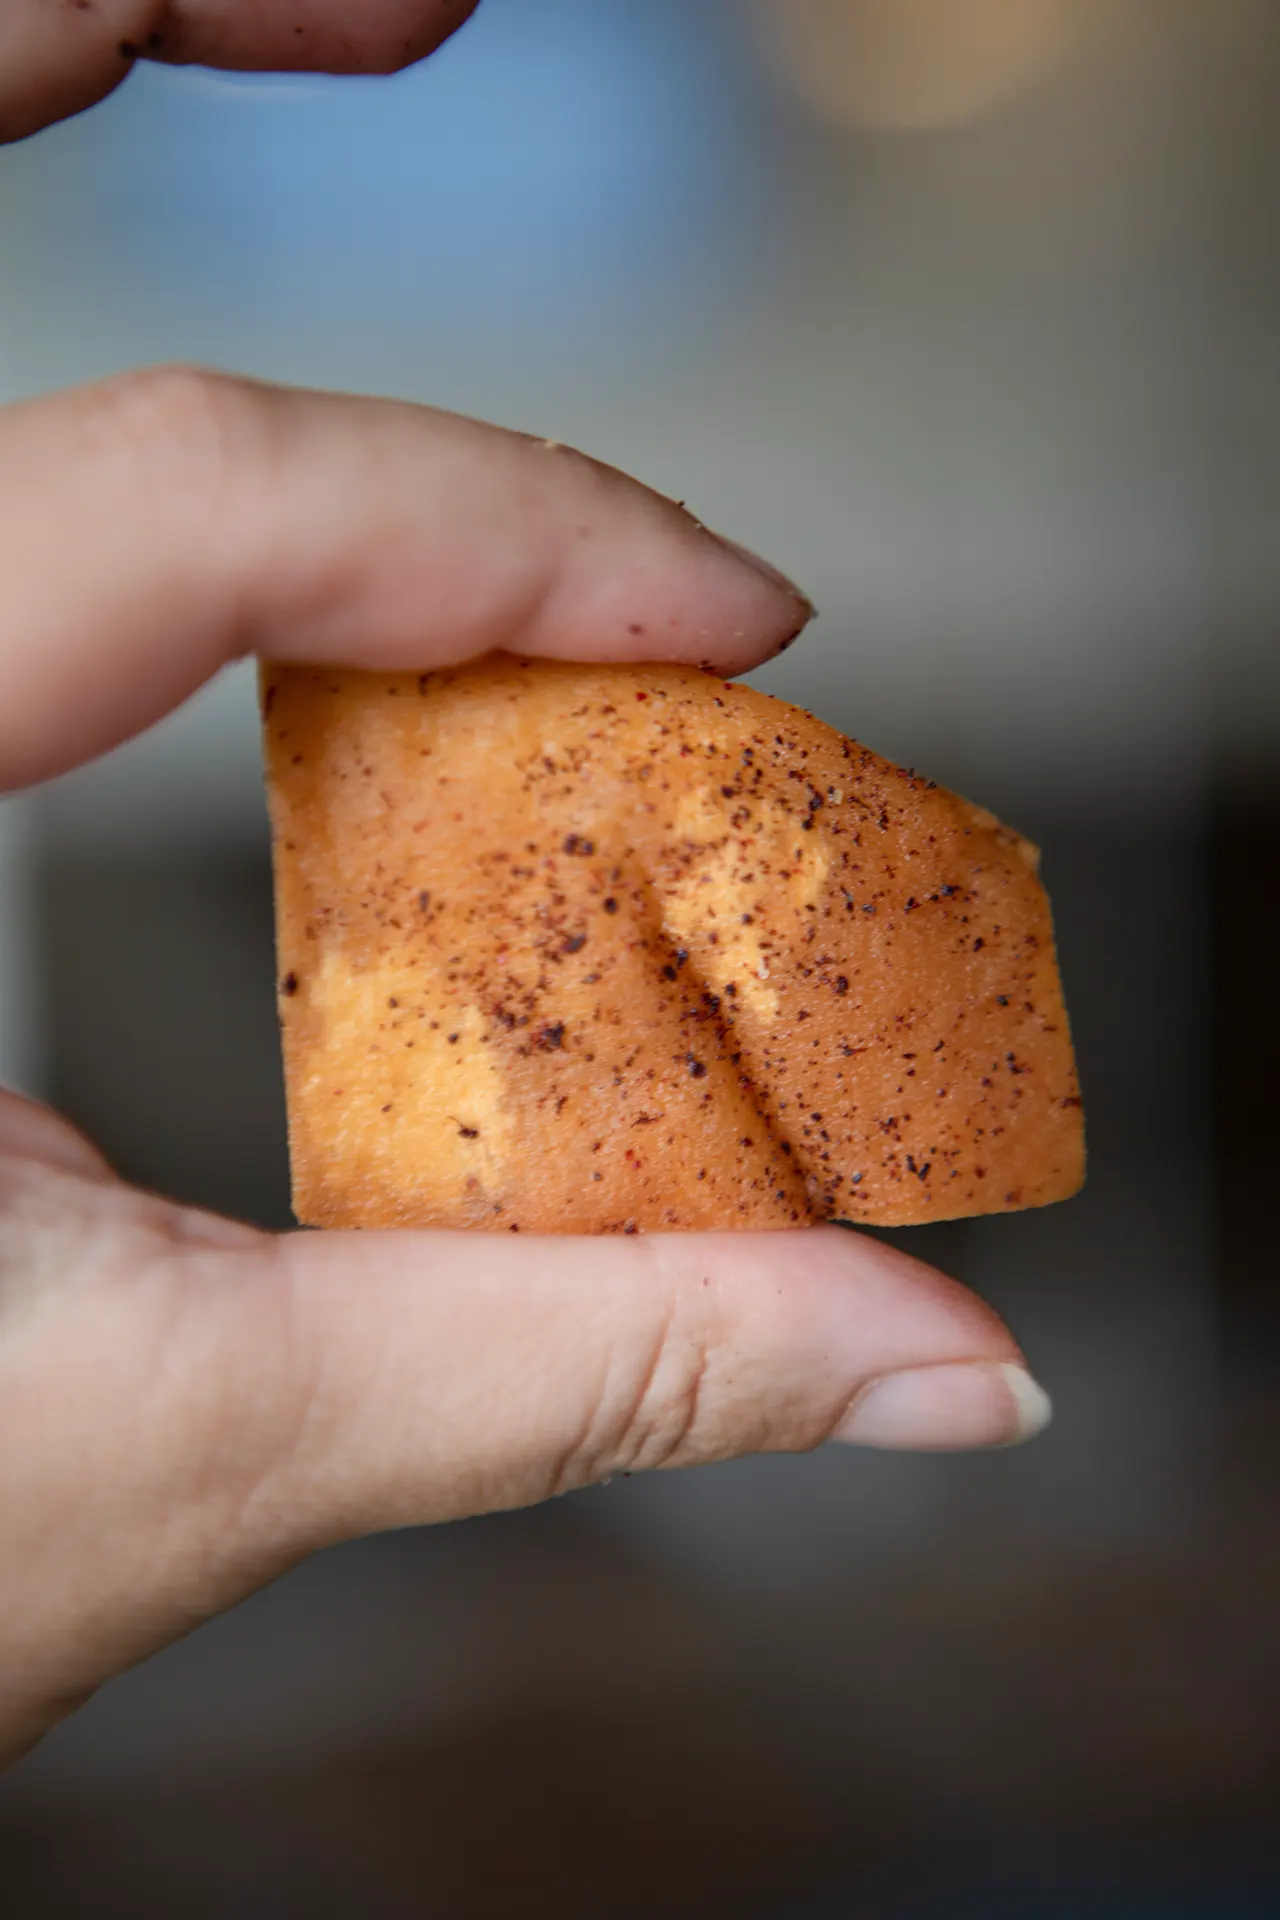 A single golden brown pita chip is held in the air by a thumb and index finger. The background is blurred out of view.